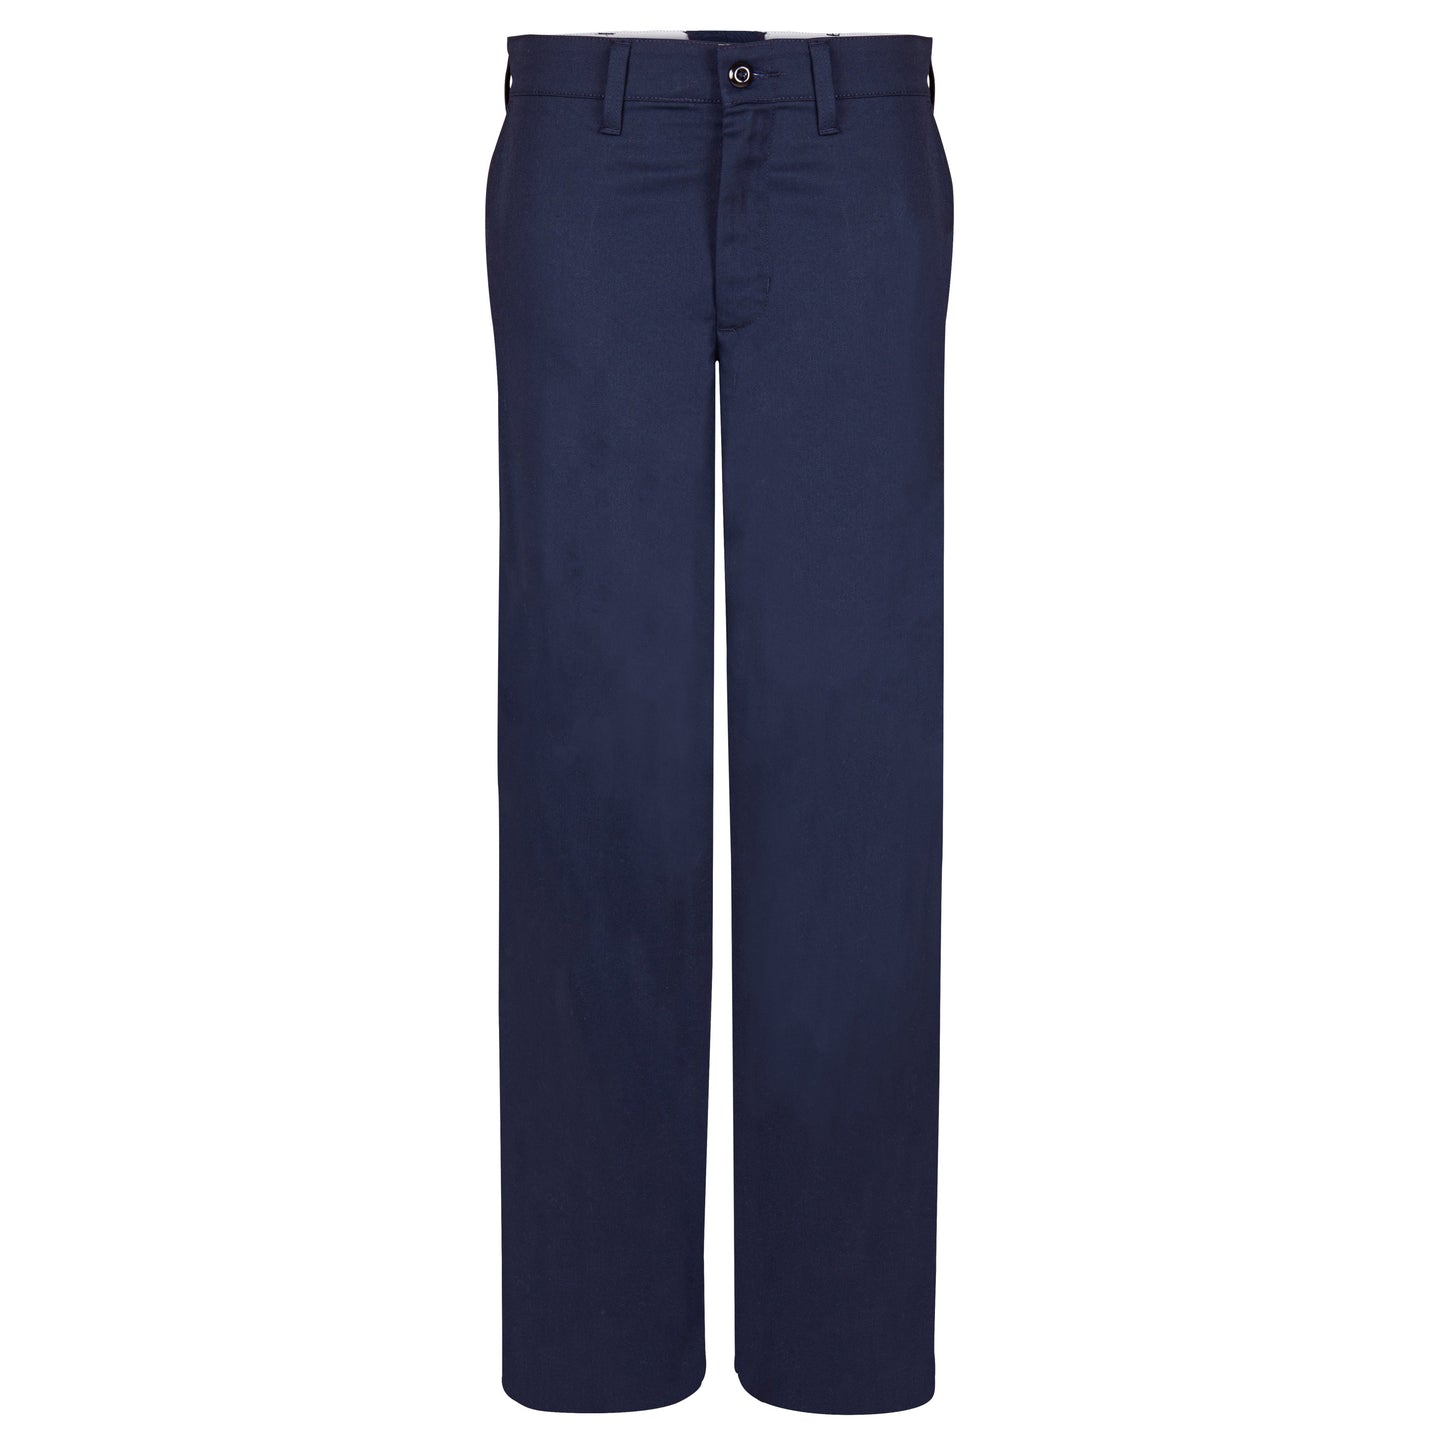 American Dawn | Navy Blue 54X34 Inch Work Pant With 4 Pockets And Button Closure With Brass Zipper